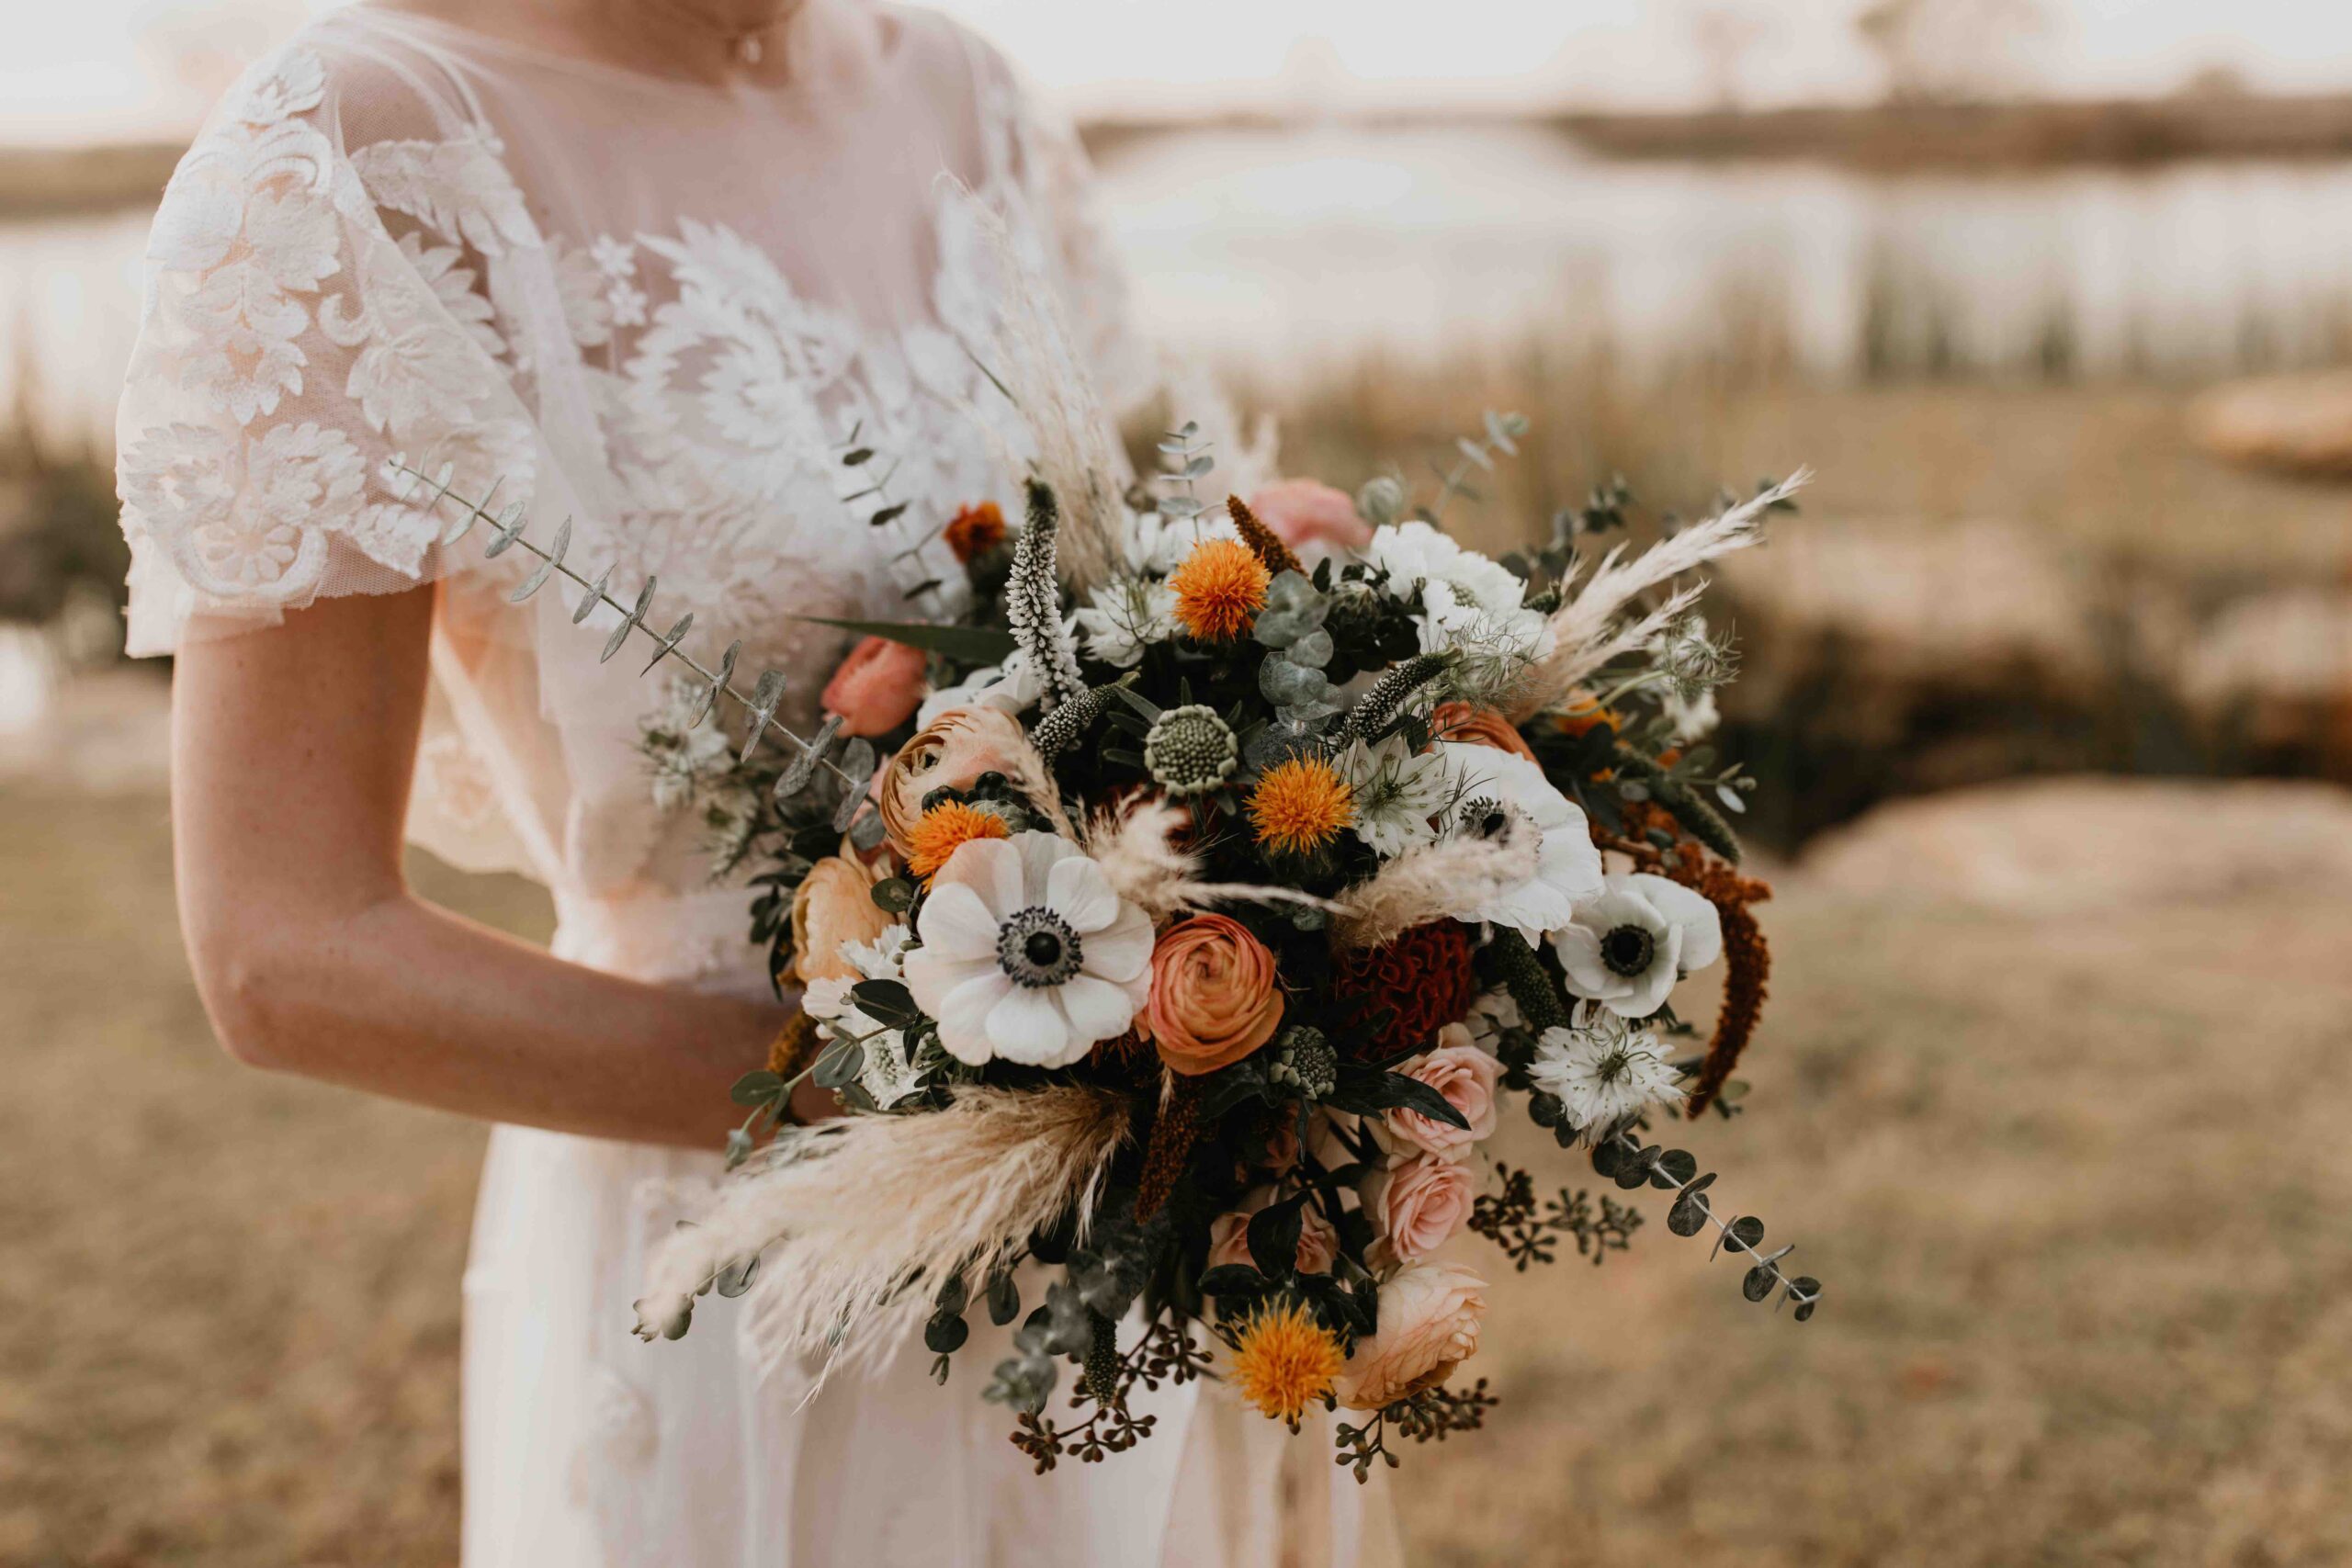 Bride holding fall bouquet featuring white, orange, and burgundy flowers